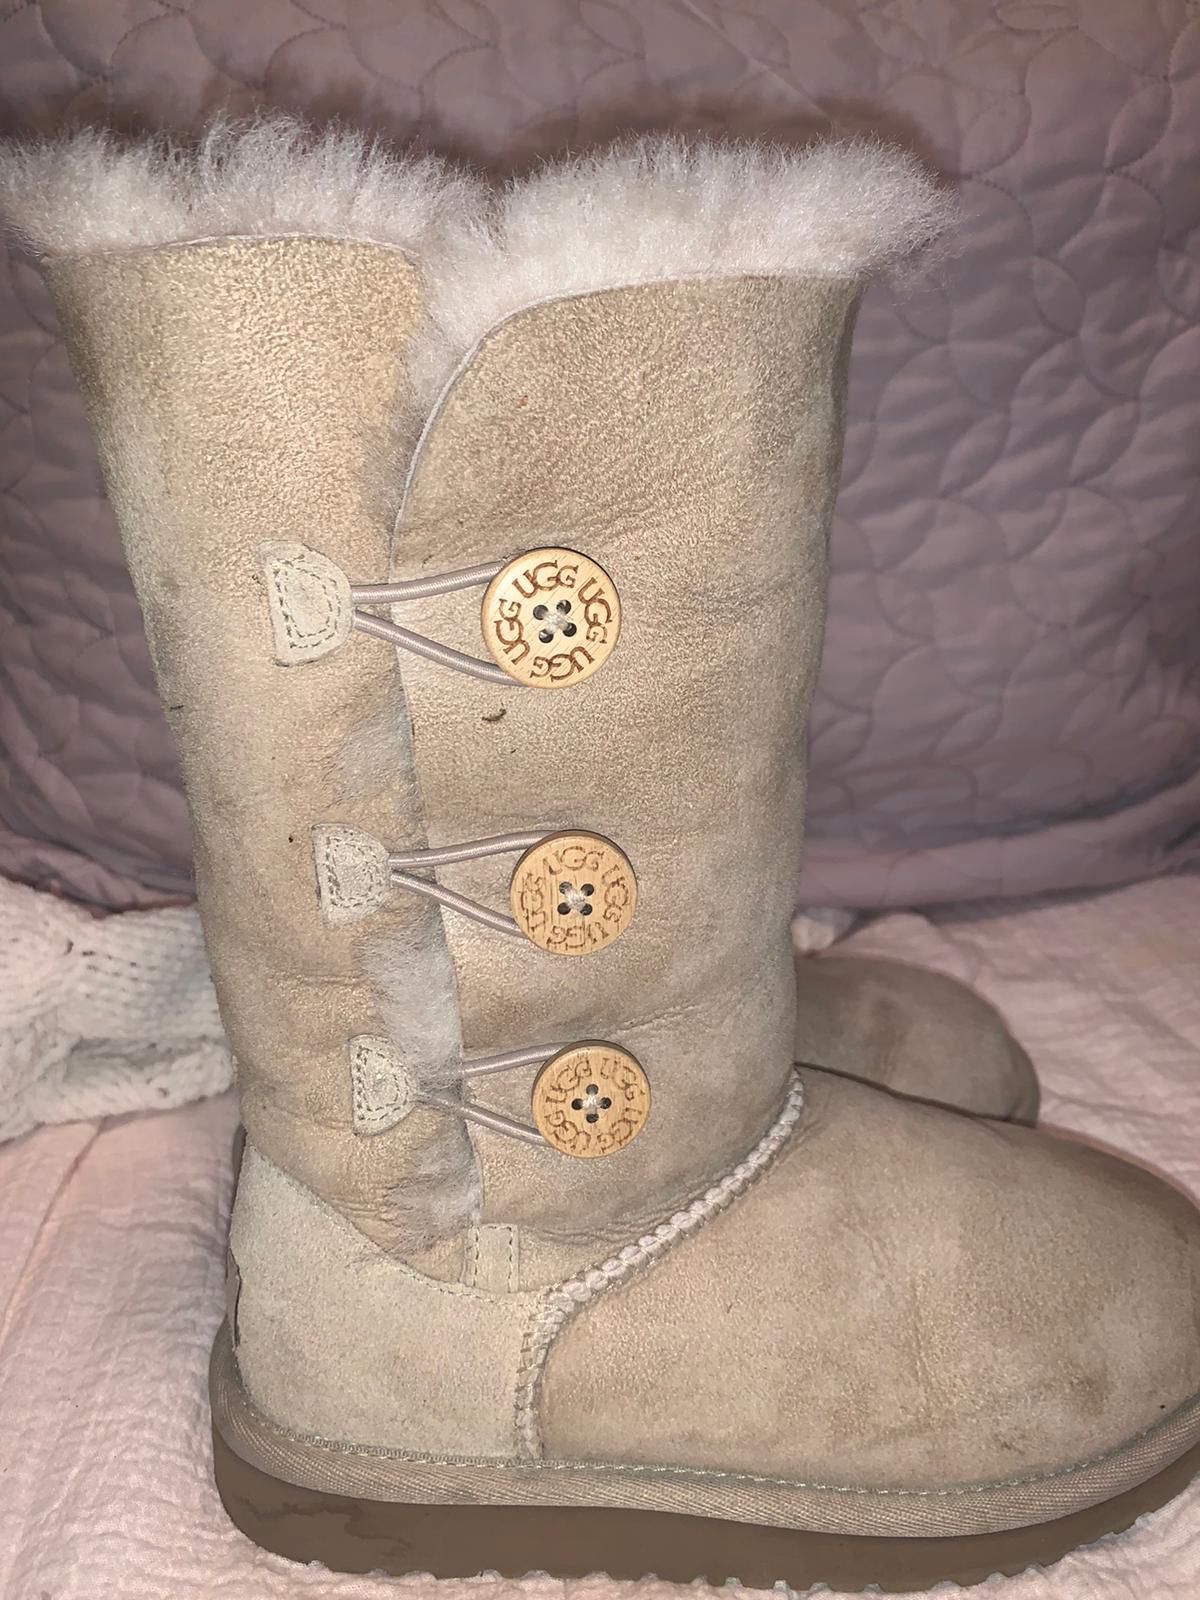 Uggs size 2